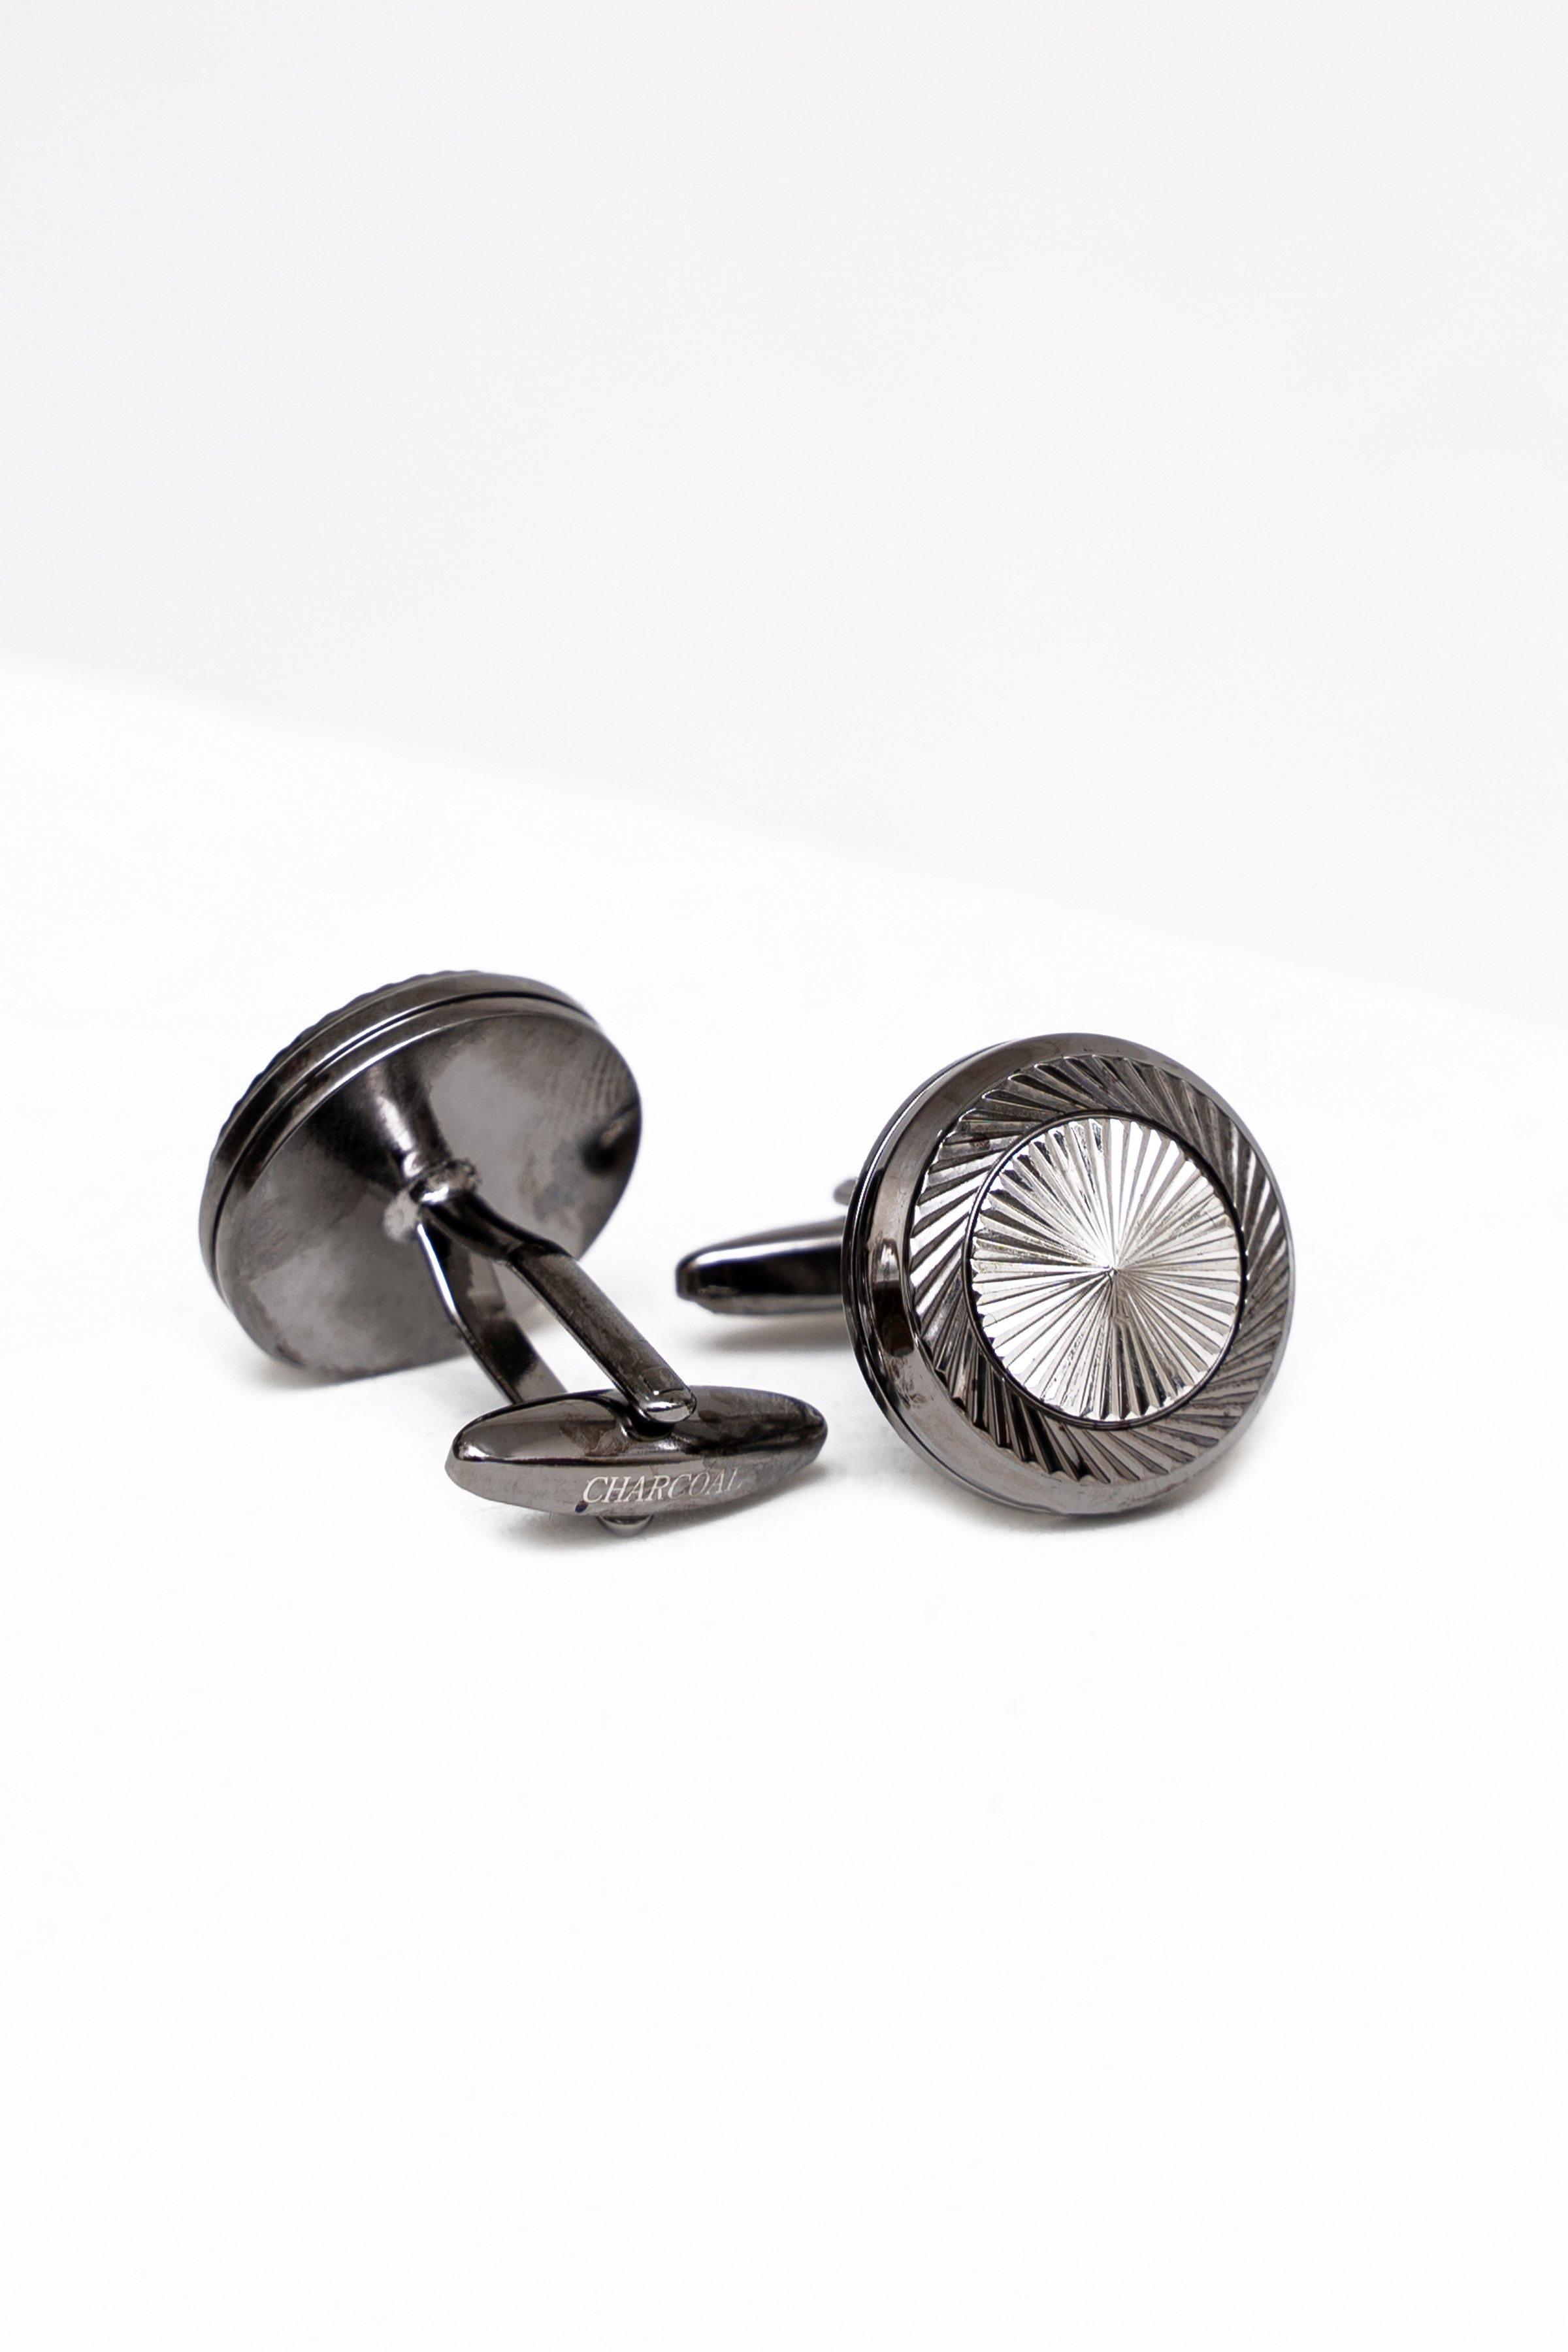 CUFFLINKS at Charcoal Clothing